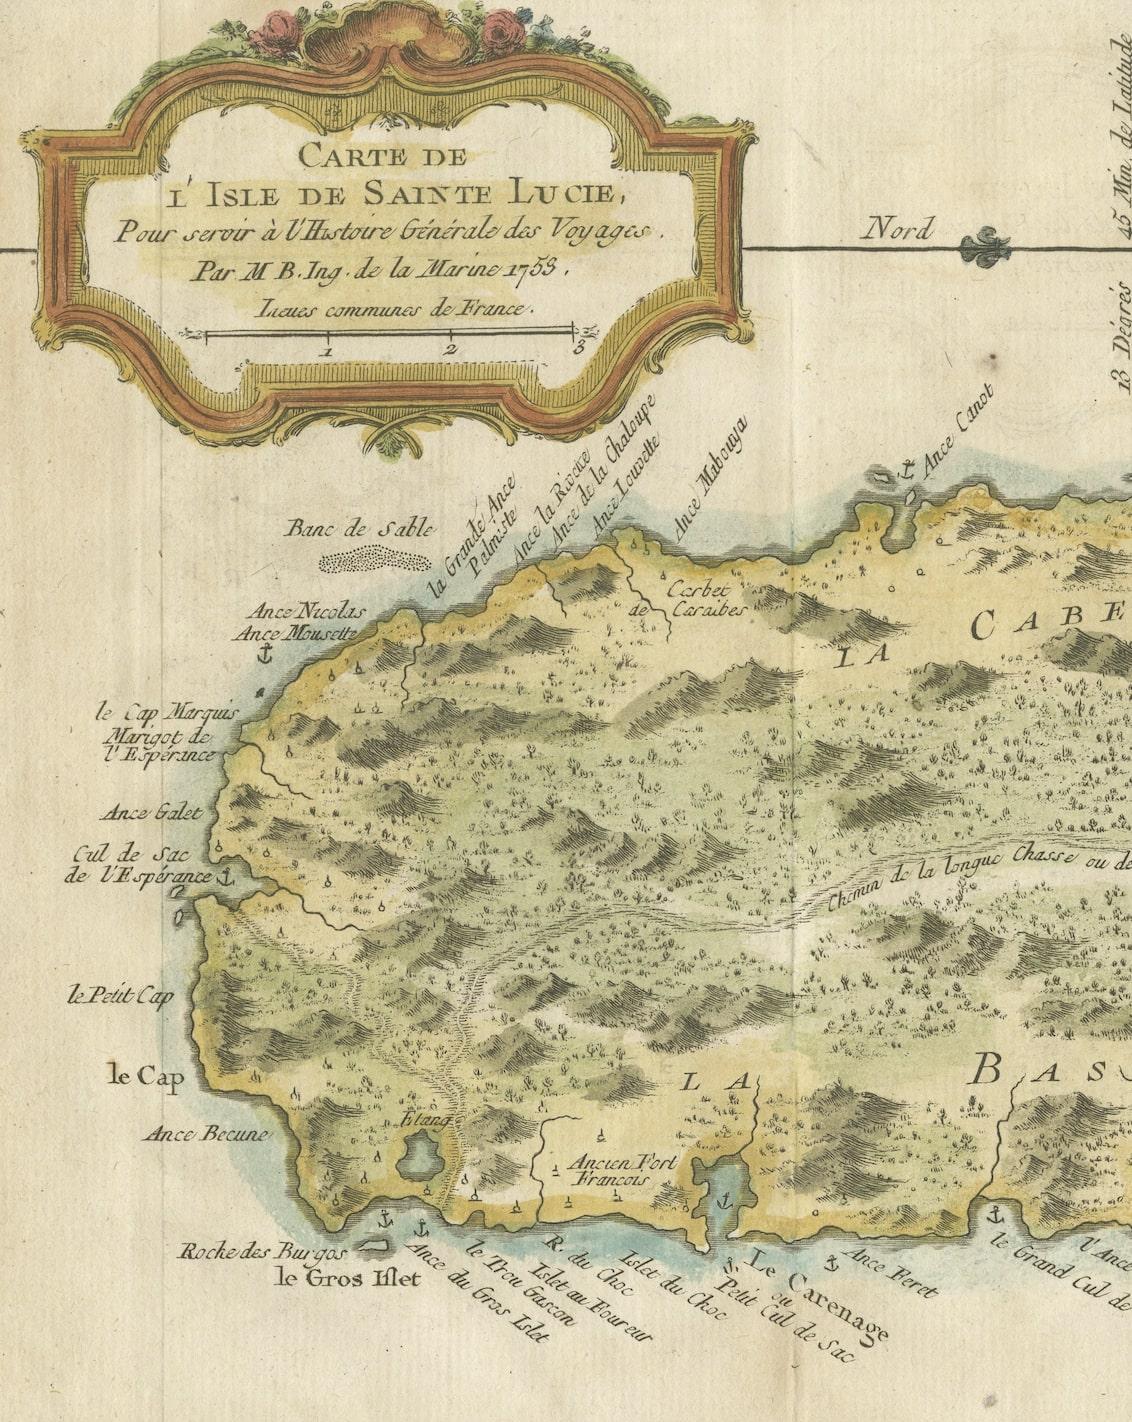 19th Century Engraved Map by Bellin of Saint Lucia or Sainte Lucie in the West Indies, 1764